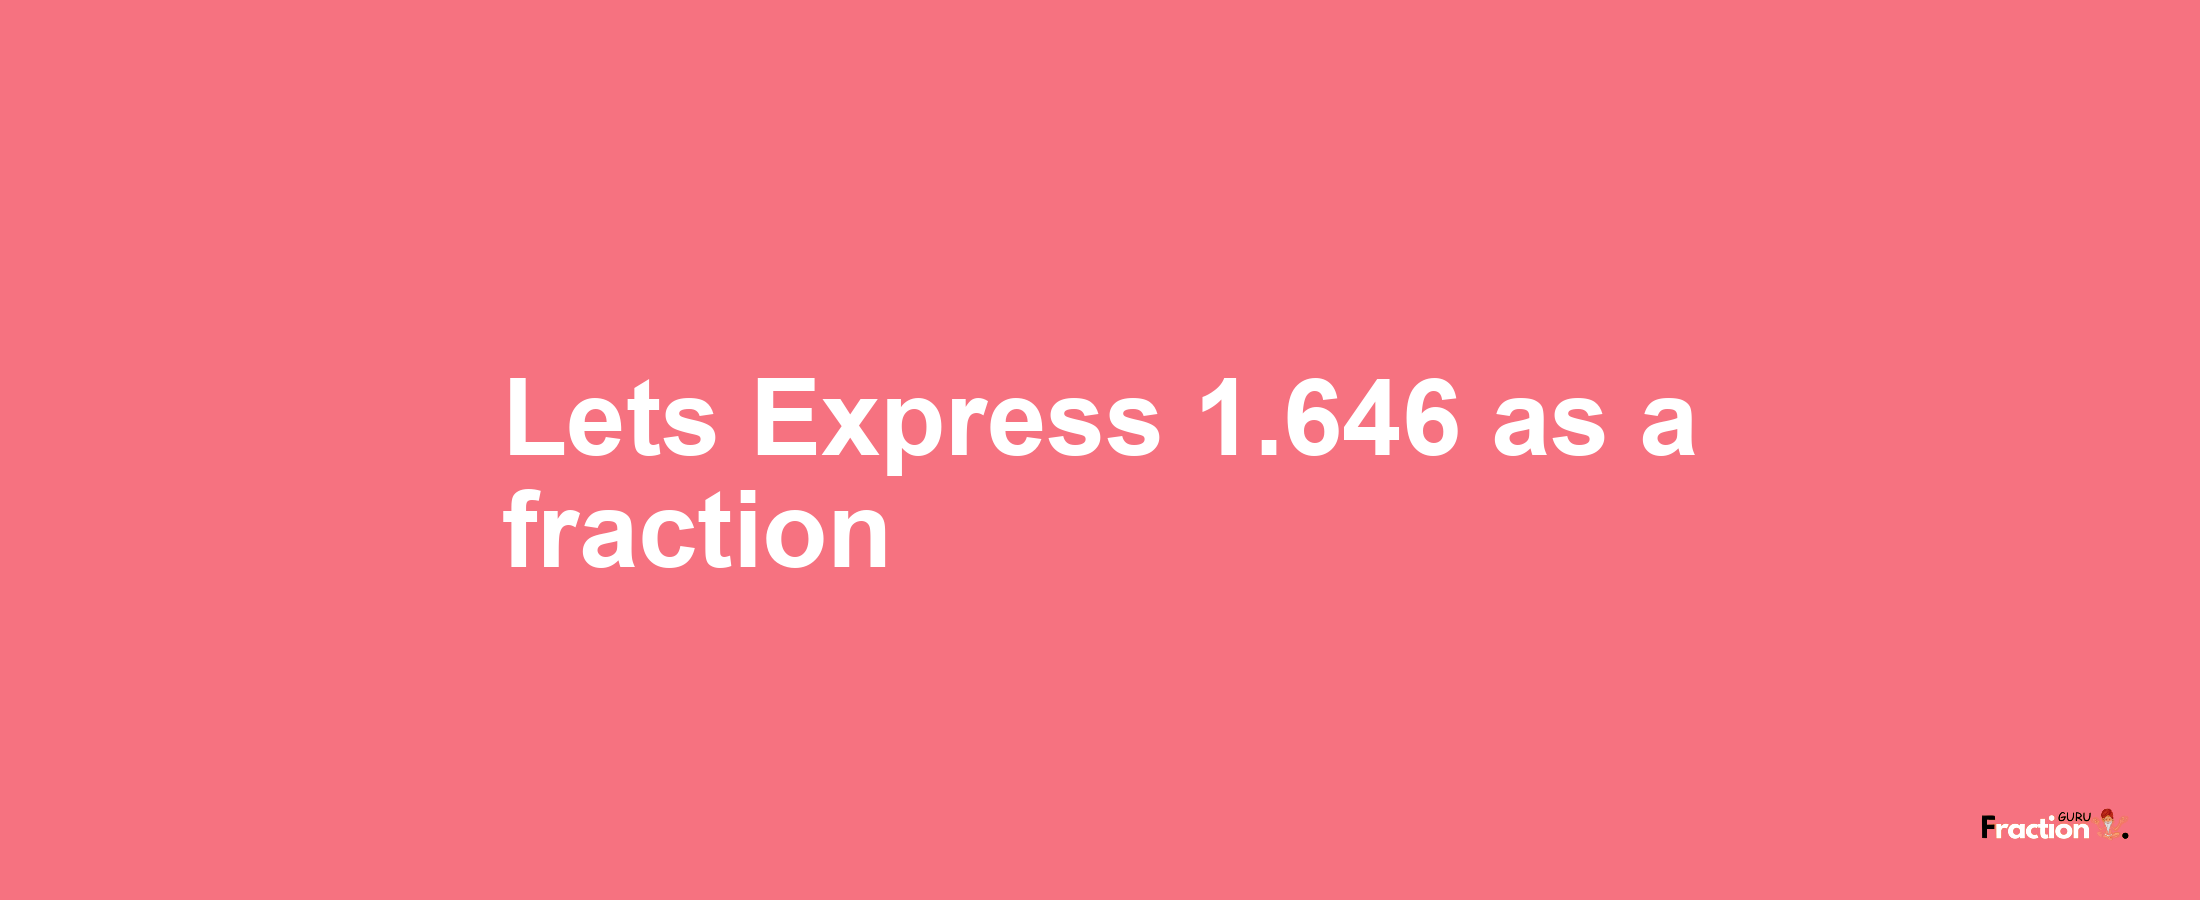 Lets Express 1.646 as afraction